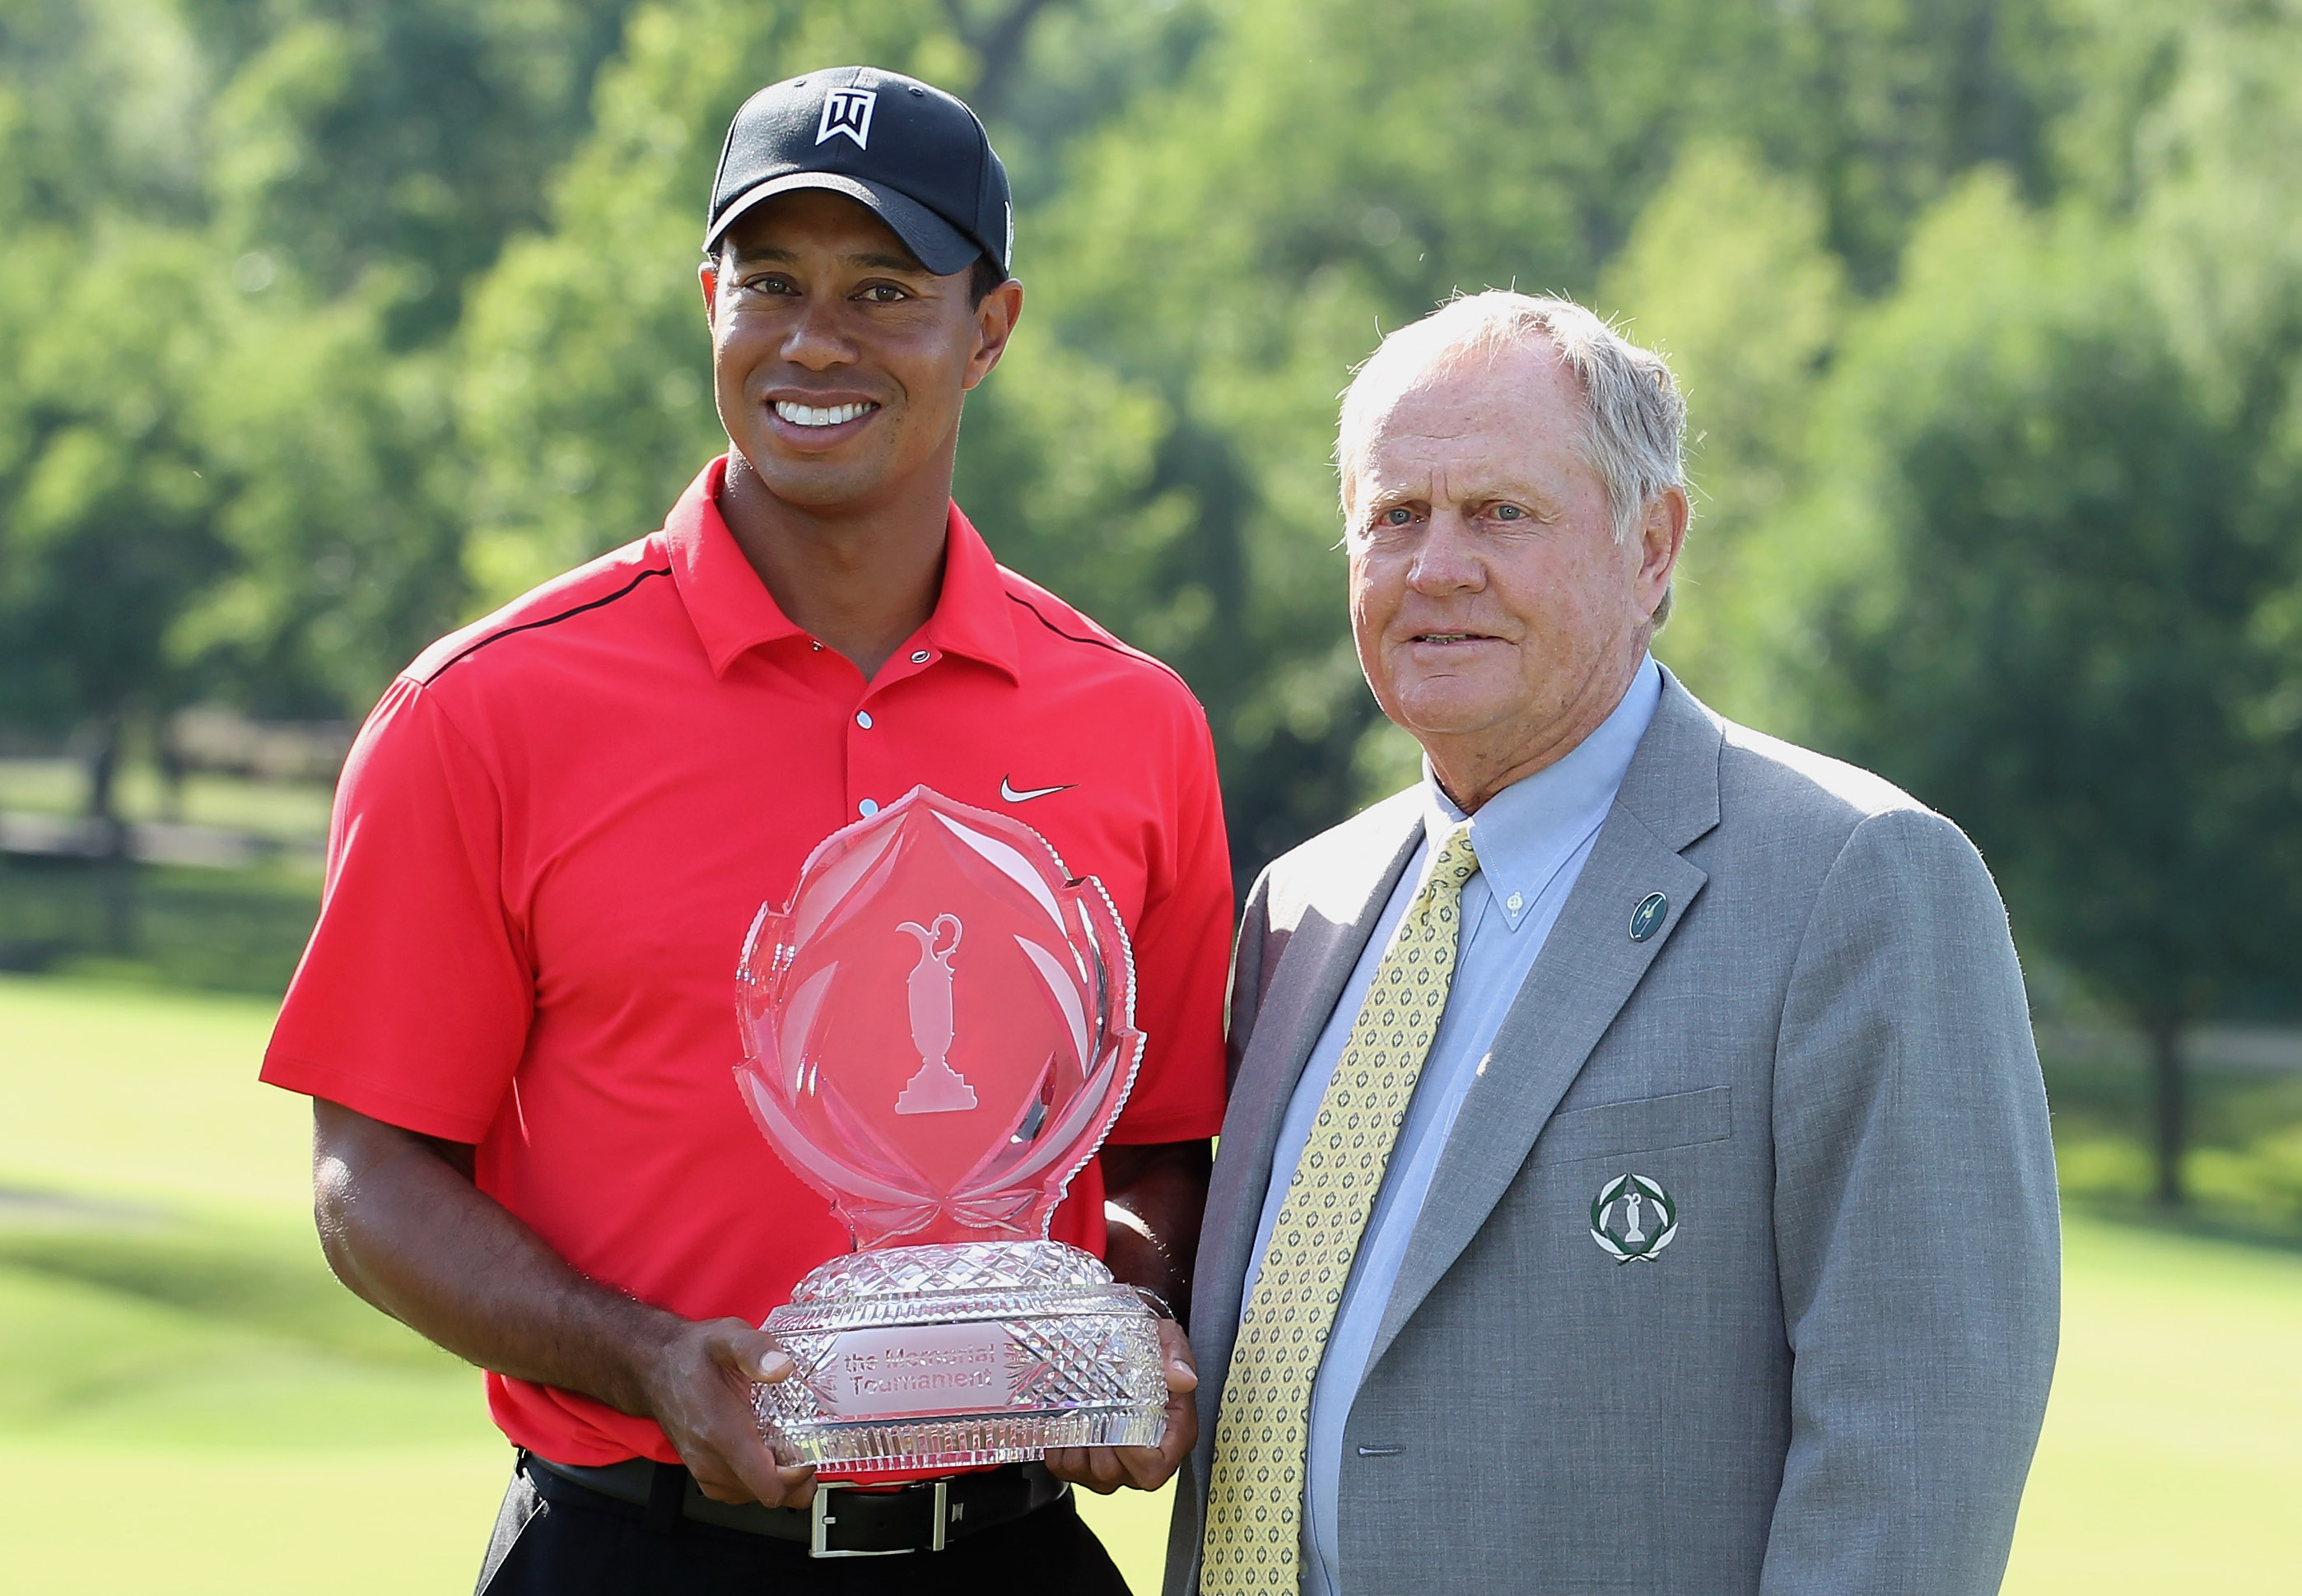 Why Is Jack Nicklaus’ Tournament Called the Memorial?